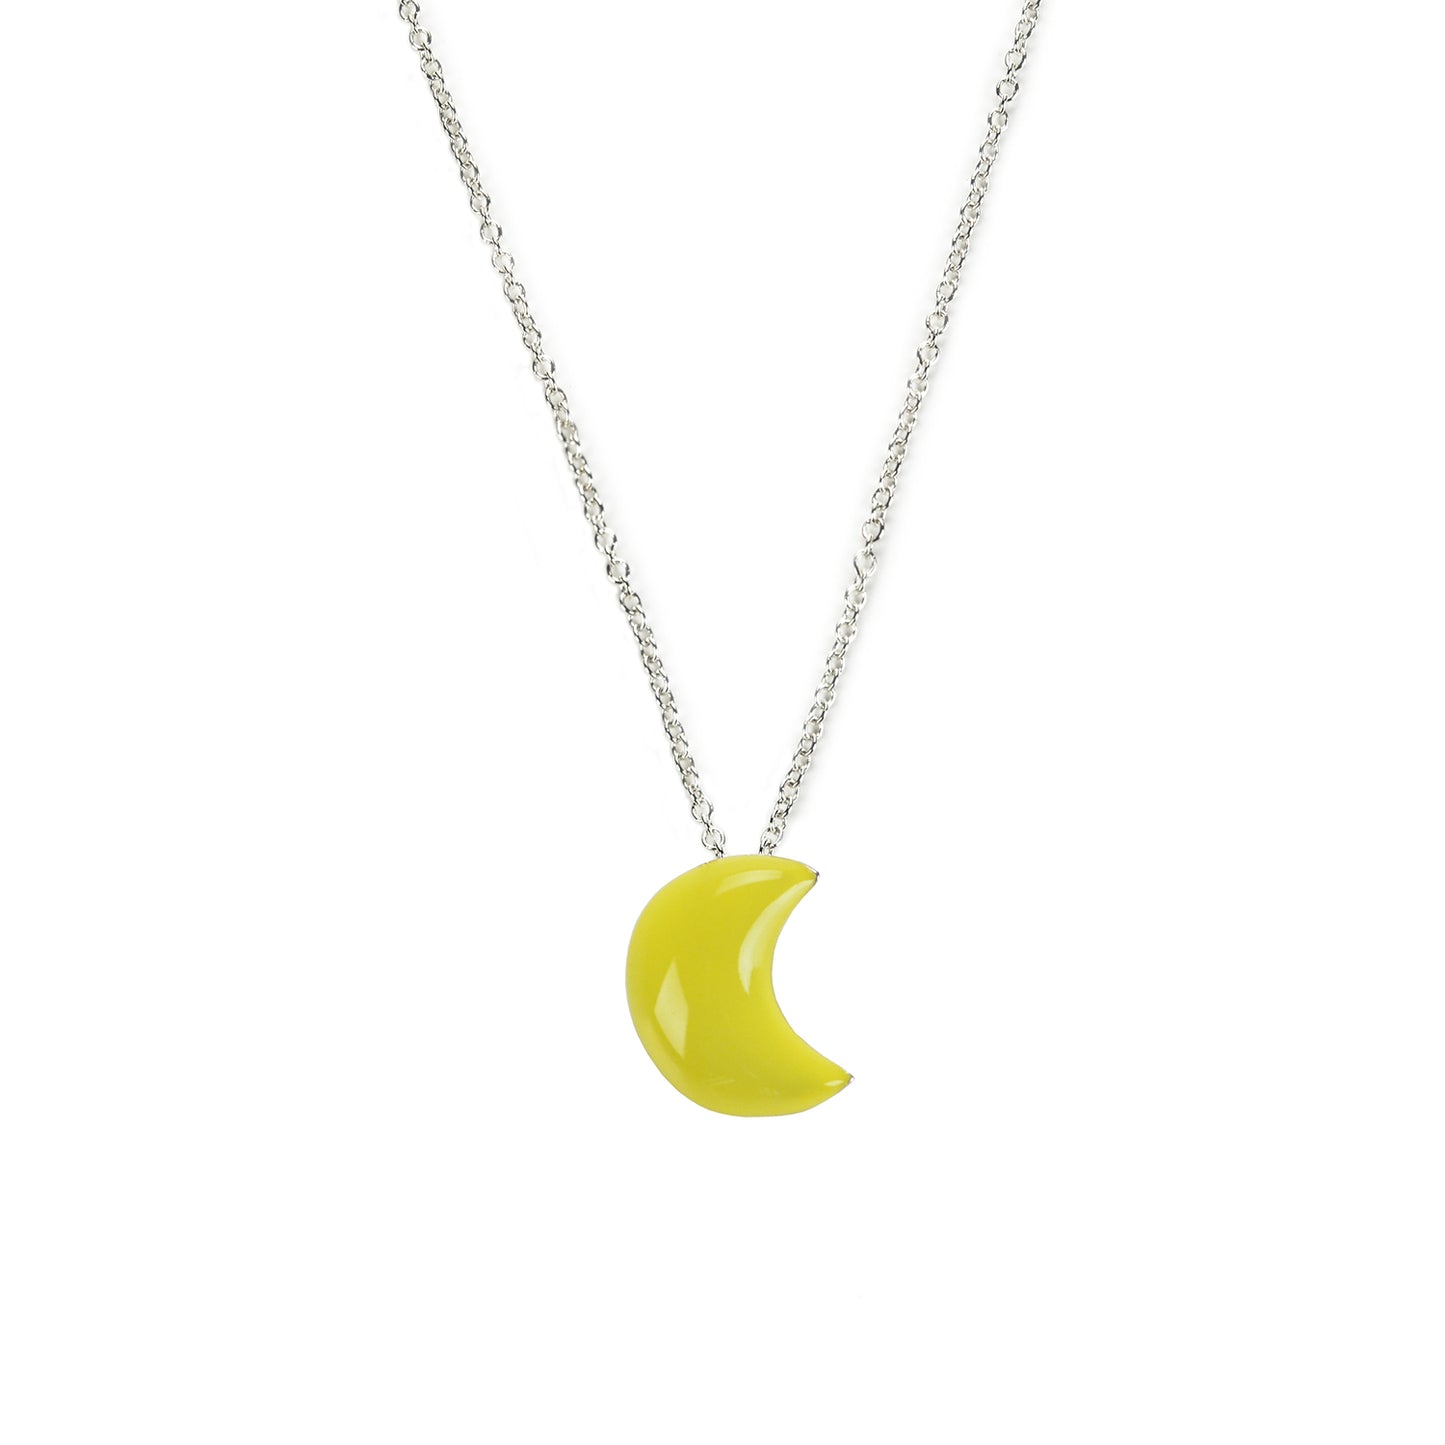 Crescent moon pendant necklace in silver and enamel